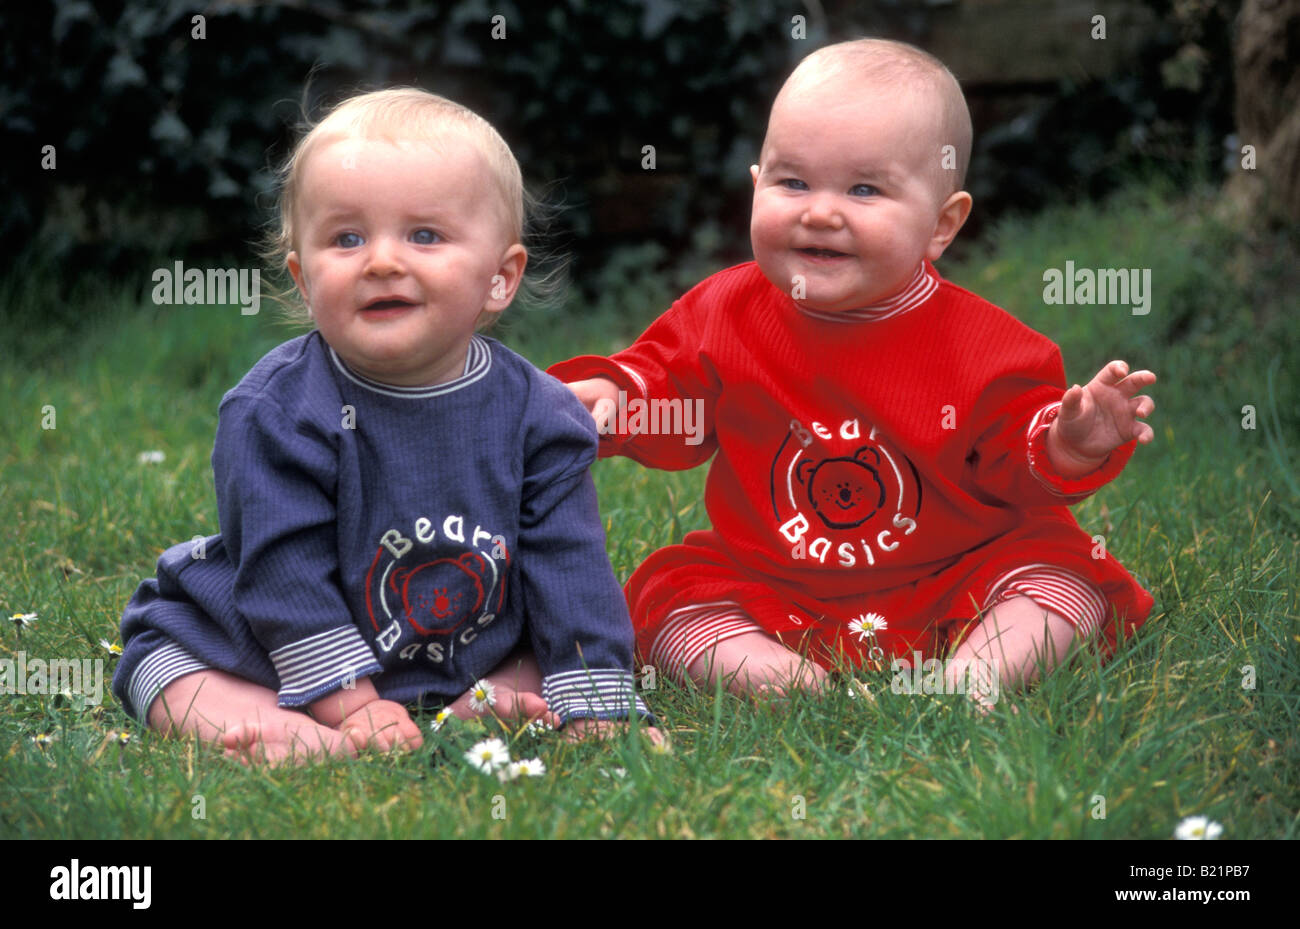 portrait non identical boy and girl twin babies Stock Photo